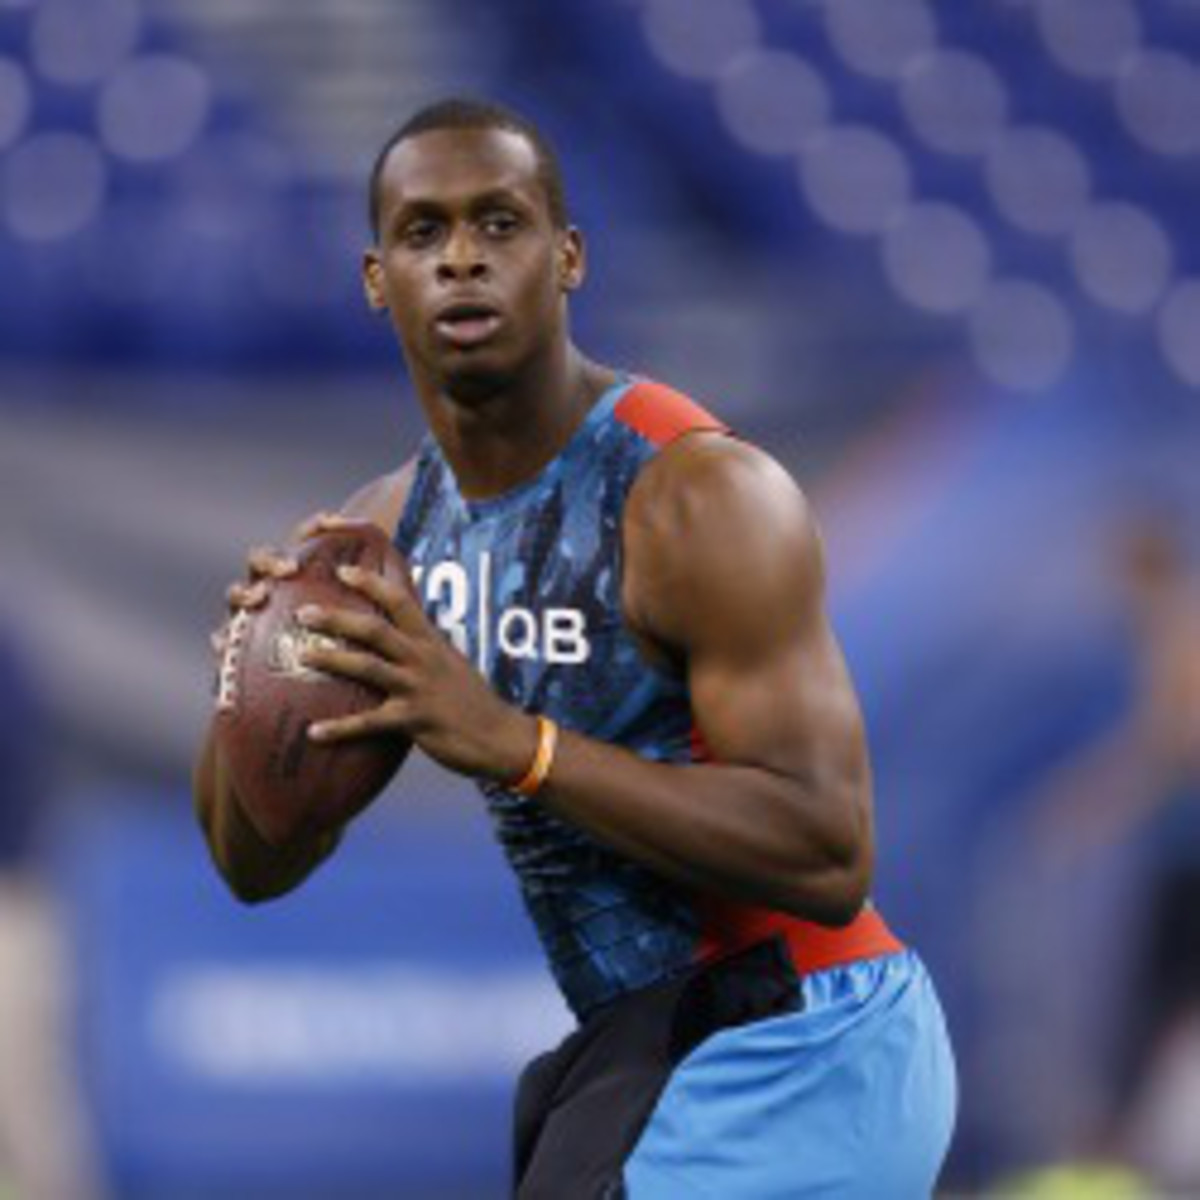 Geno Smith took to Twitter to slams his critics. (Joe Robbins/Getty Images)